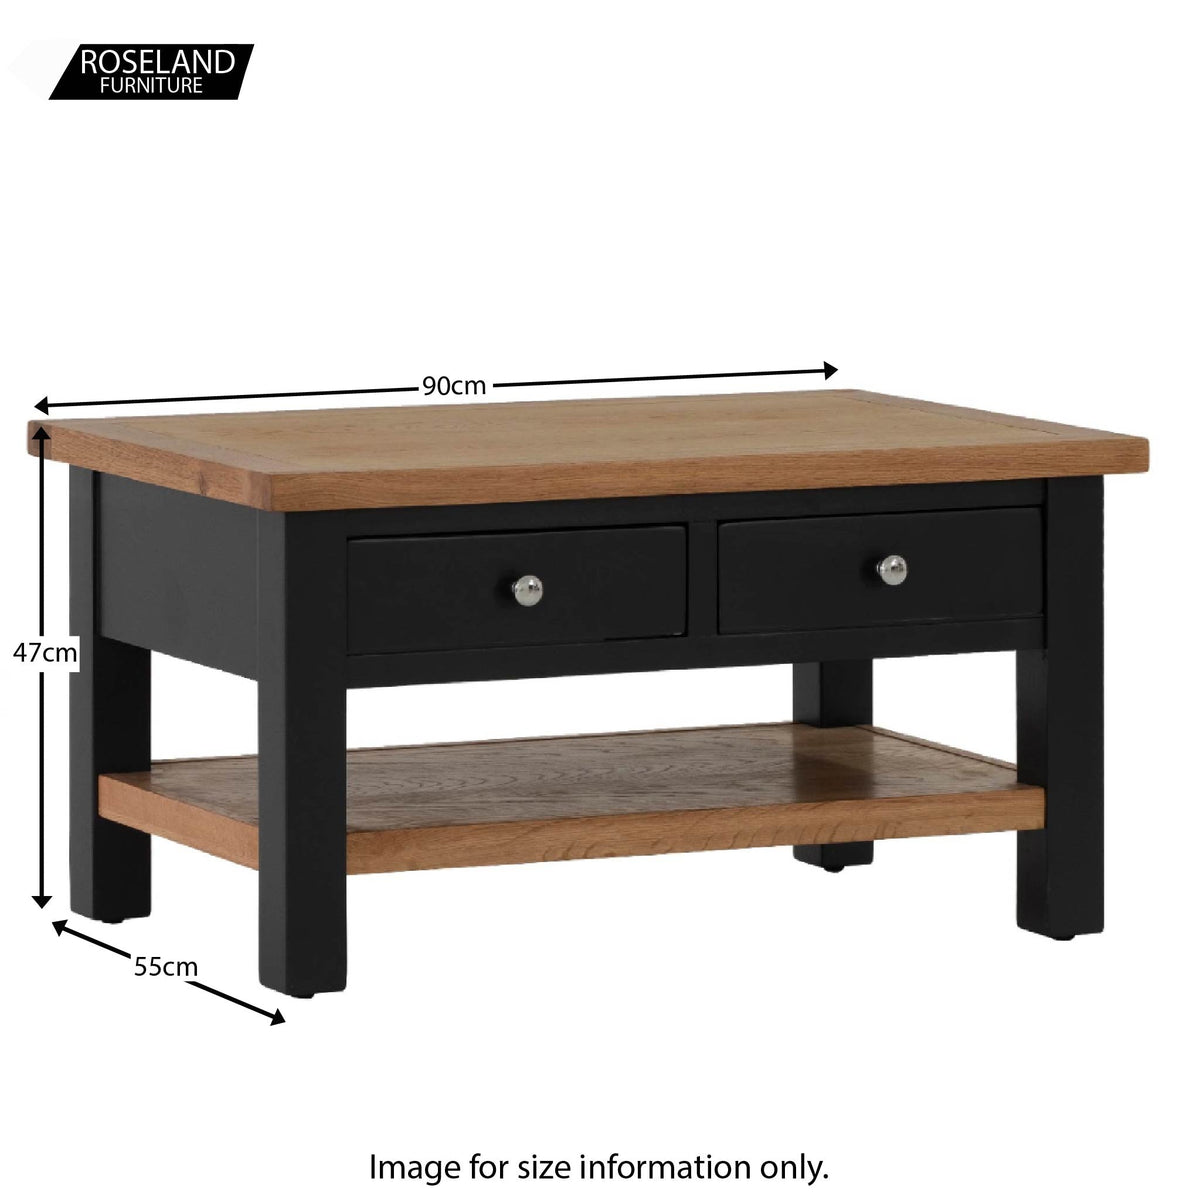 Charlestown Black Coffee Table - Size Guide